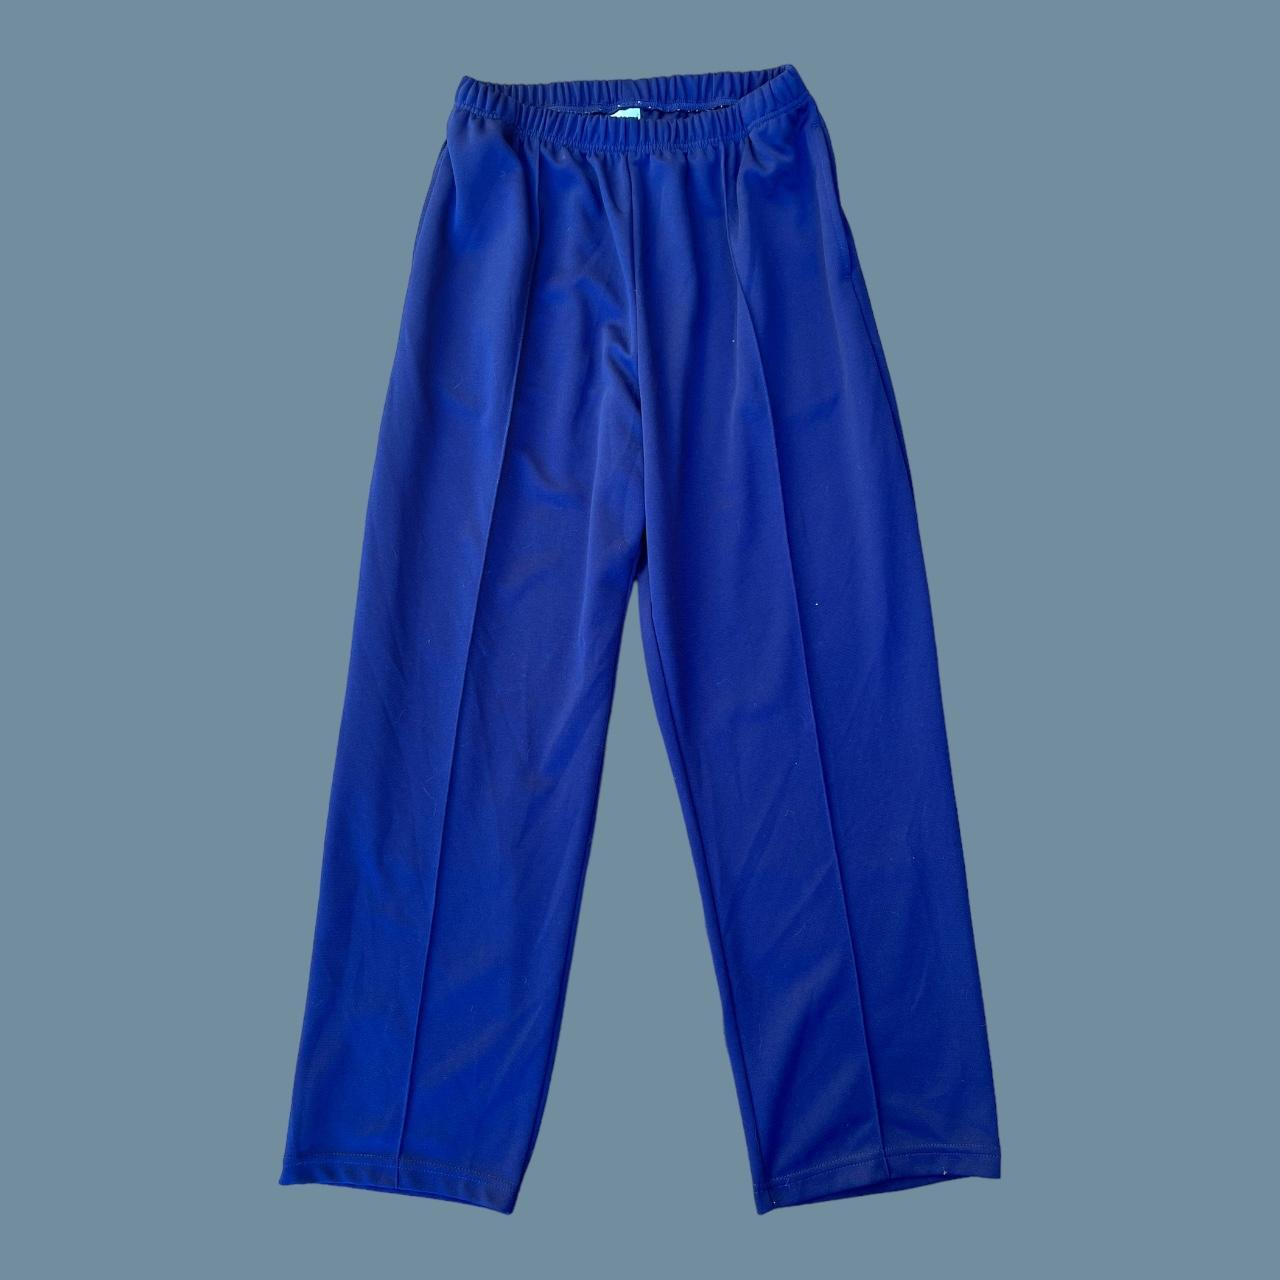 Gorman Women's Blue and Navy Trousers (4)